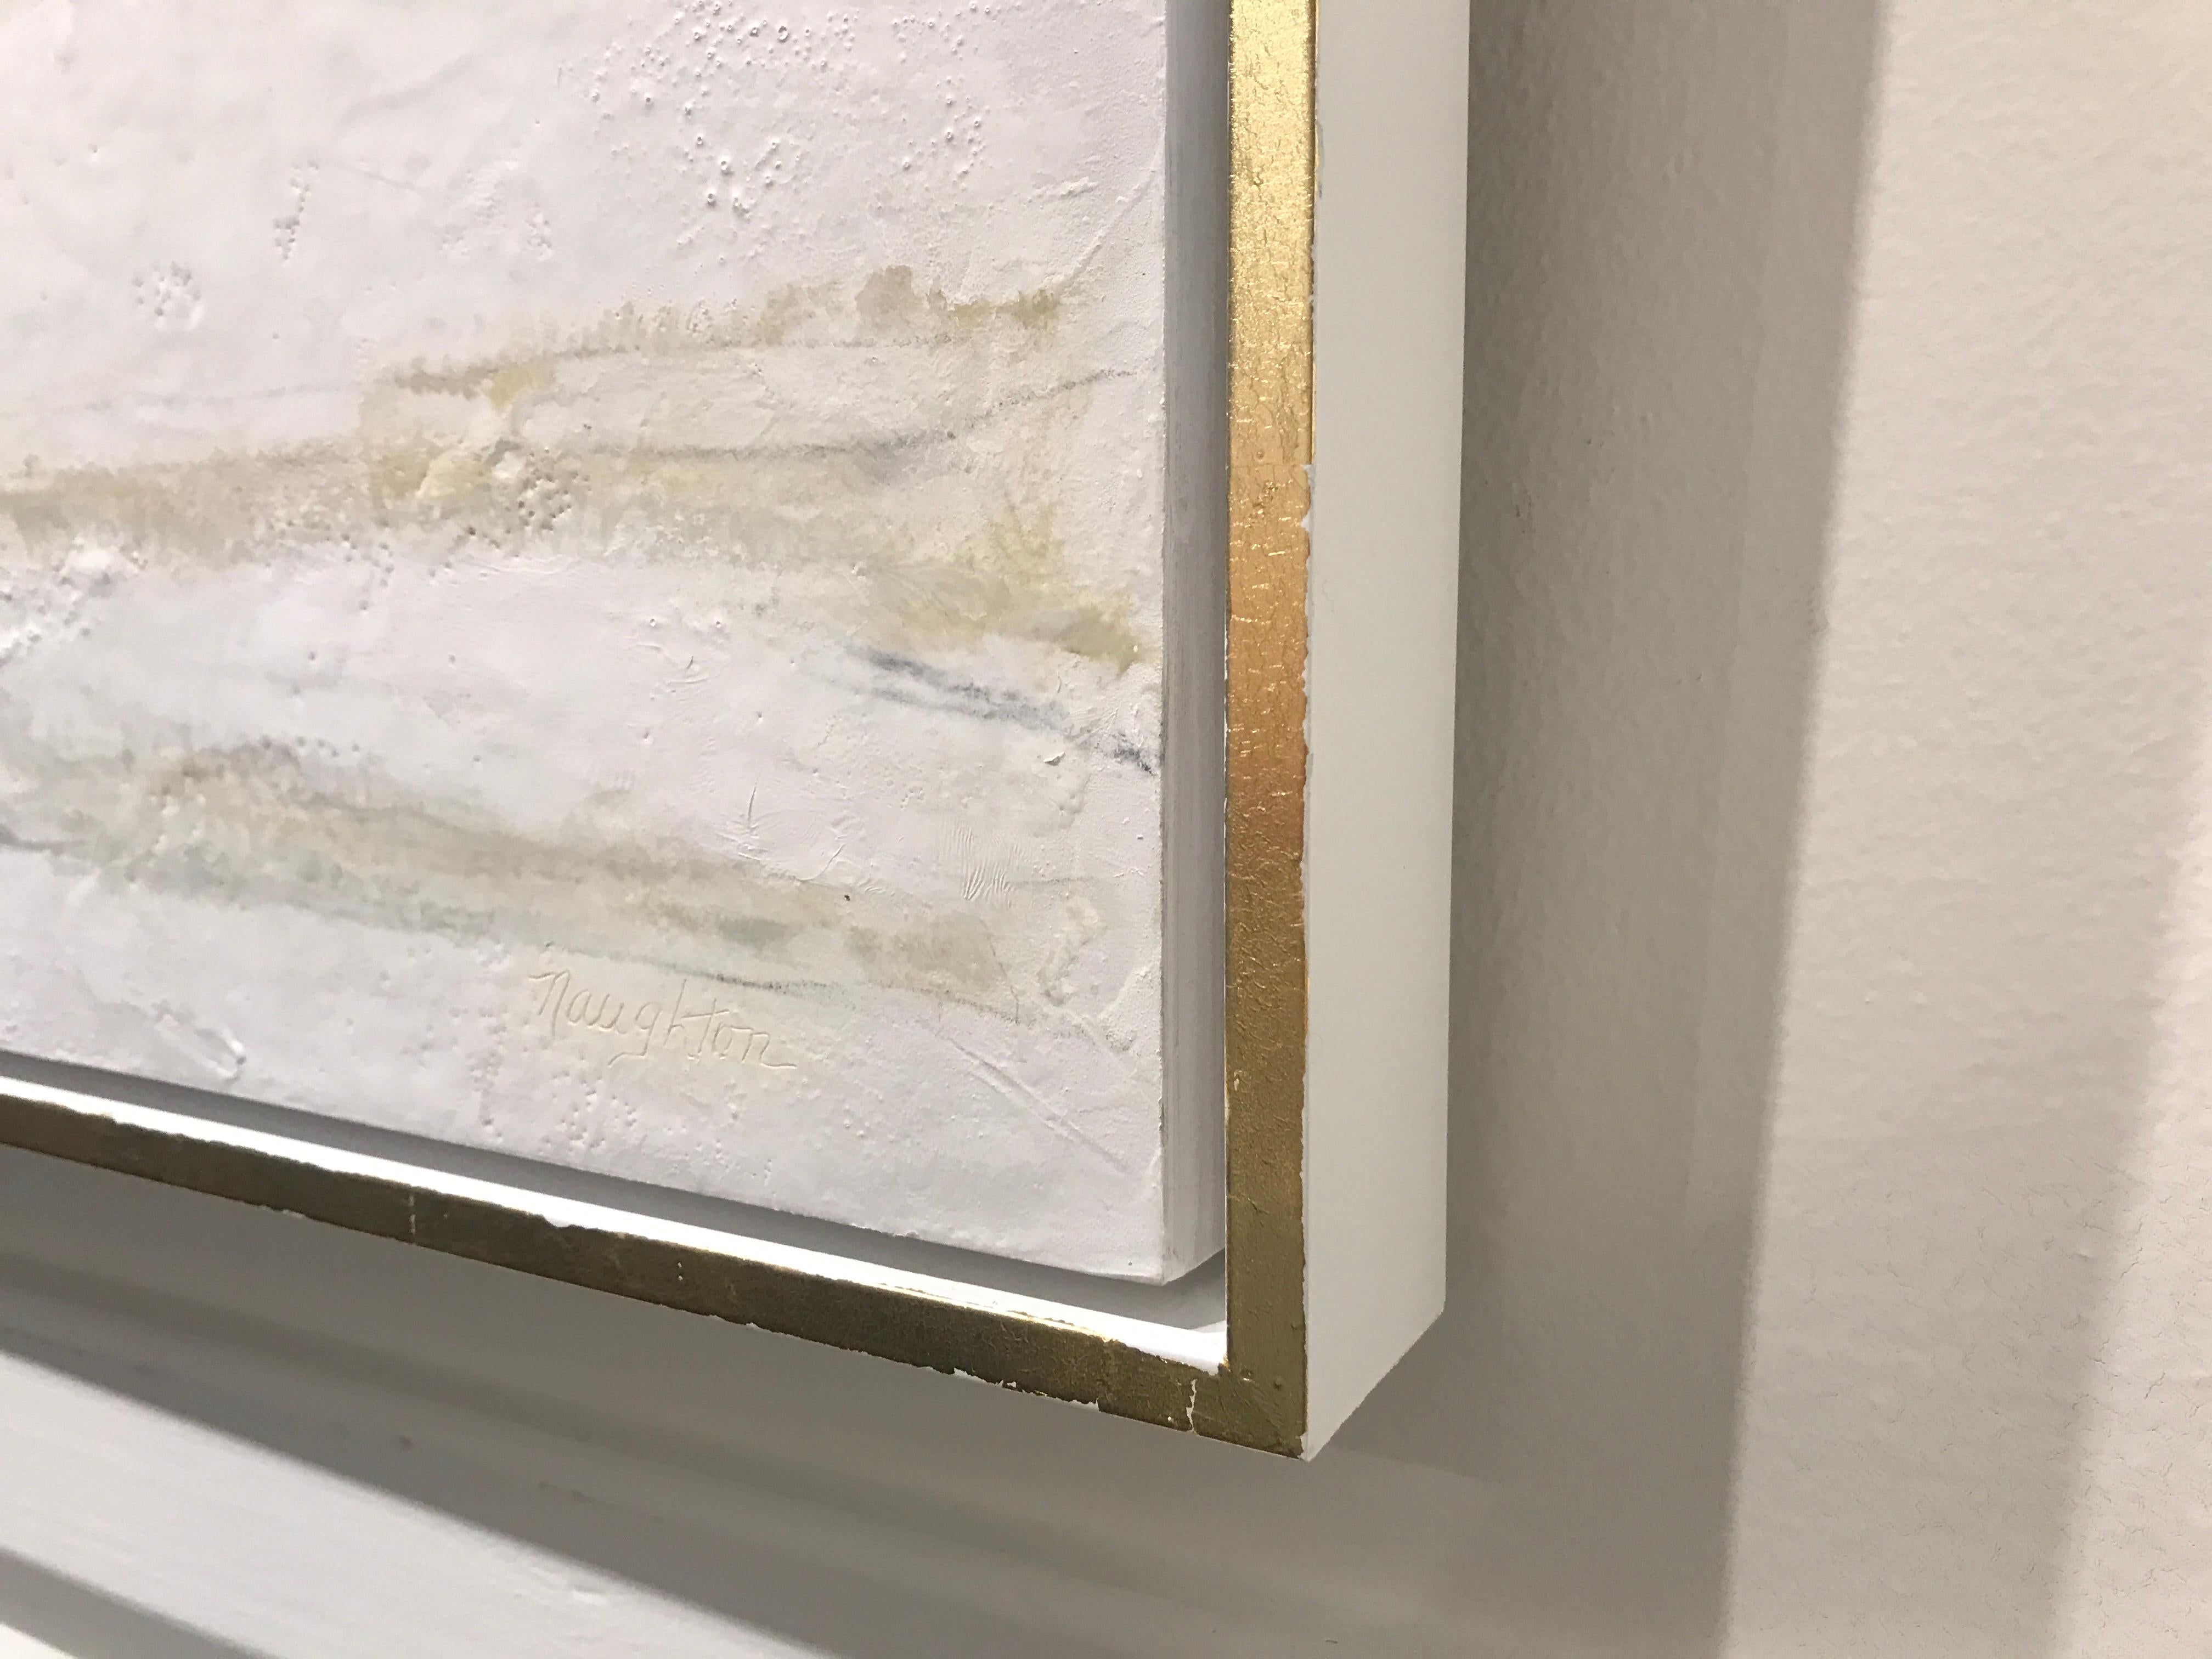 Liquid White, Maureen Naughton Large Encaustic and Gold Leaf on Board Painting 5